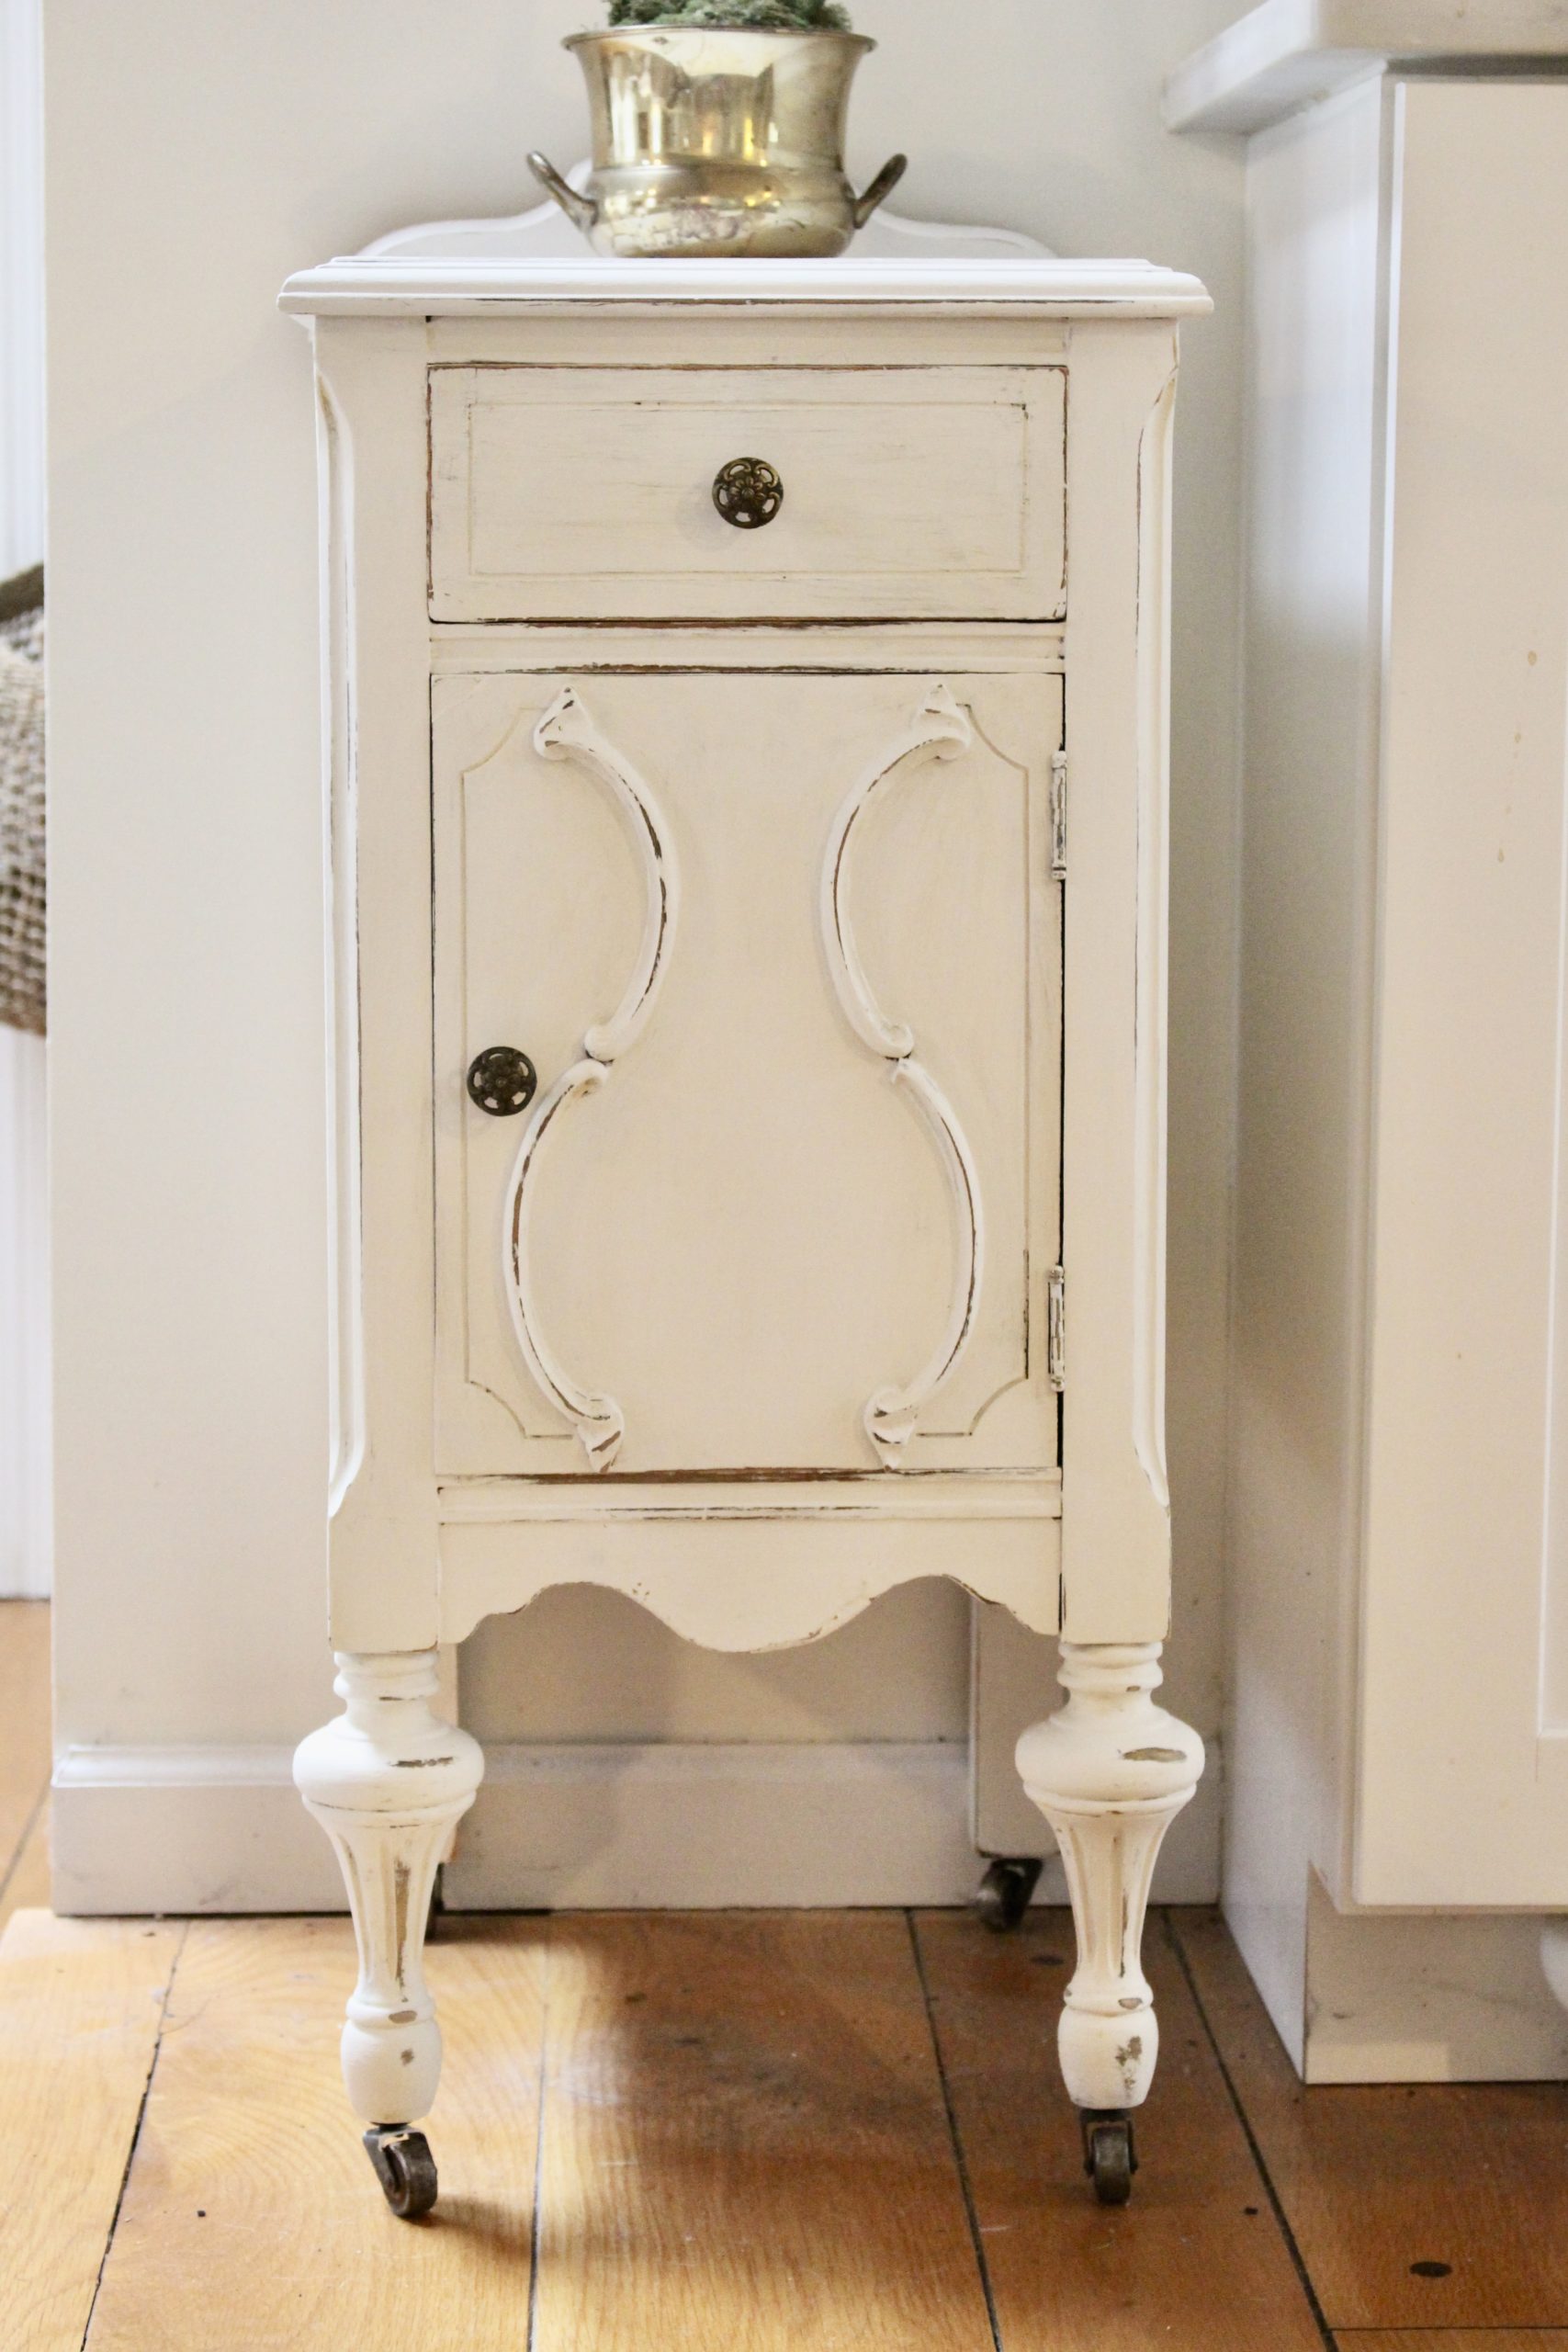 Thrift Store Cabinet Updated with Chalk Paint for a Coffee Bar.- diy- projects- painting furniture- using chalk paint- updating furniture- rusteoleum linen white chalk paint